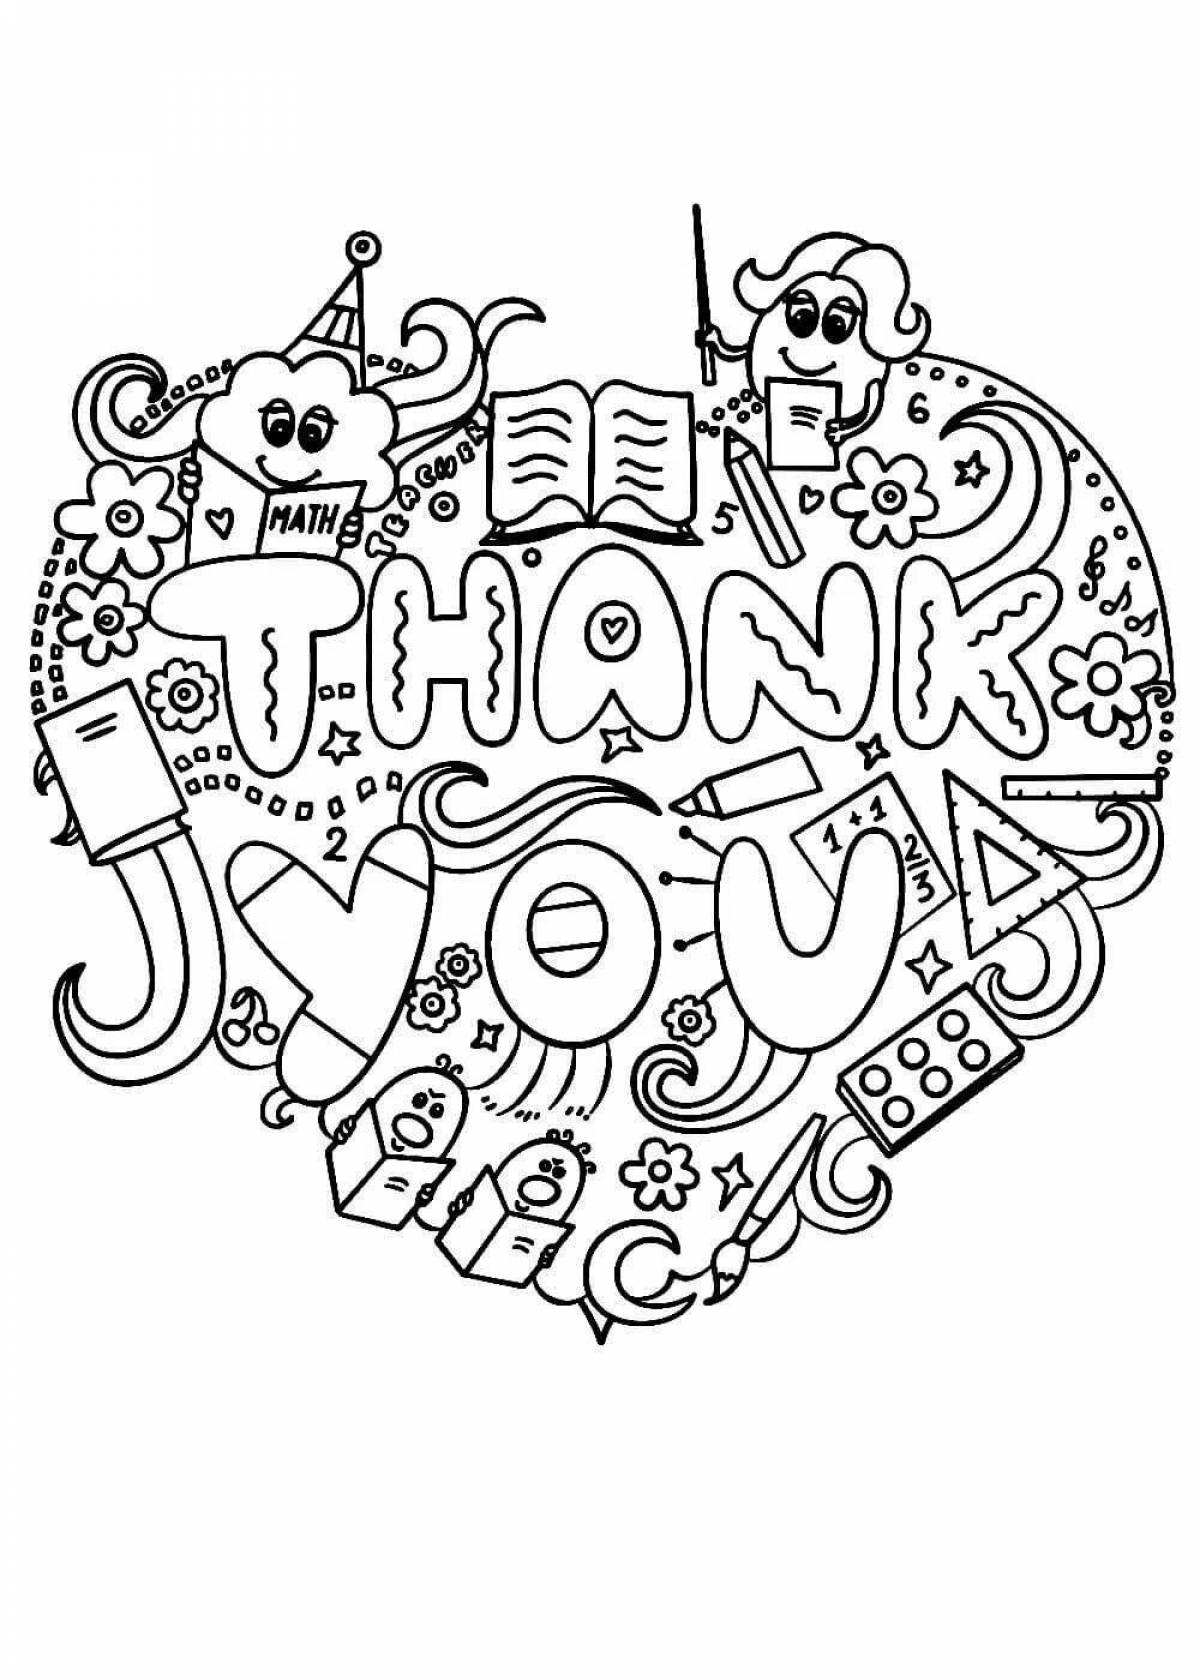 Bright thank you coloring book for kids